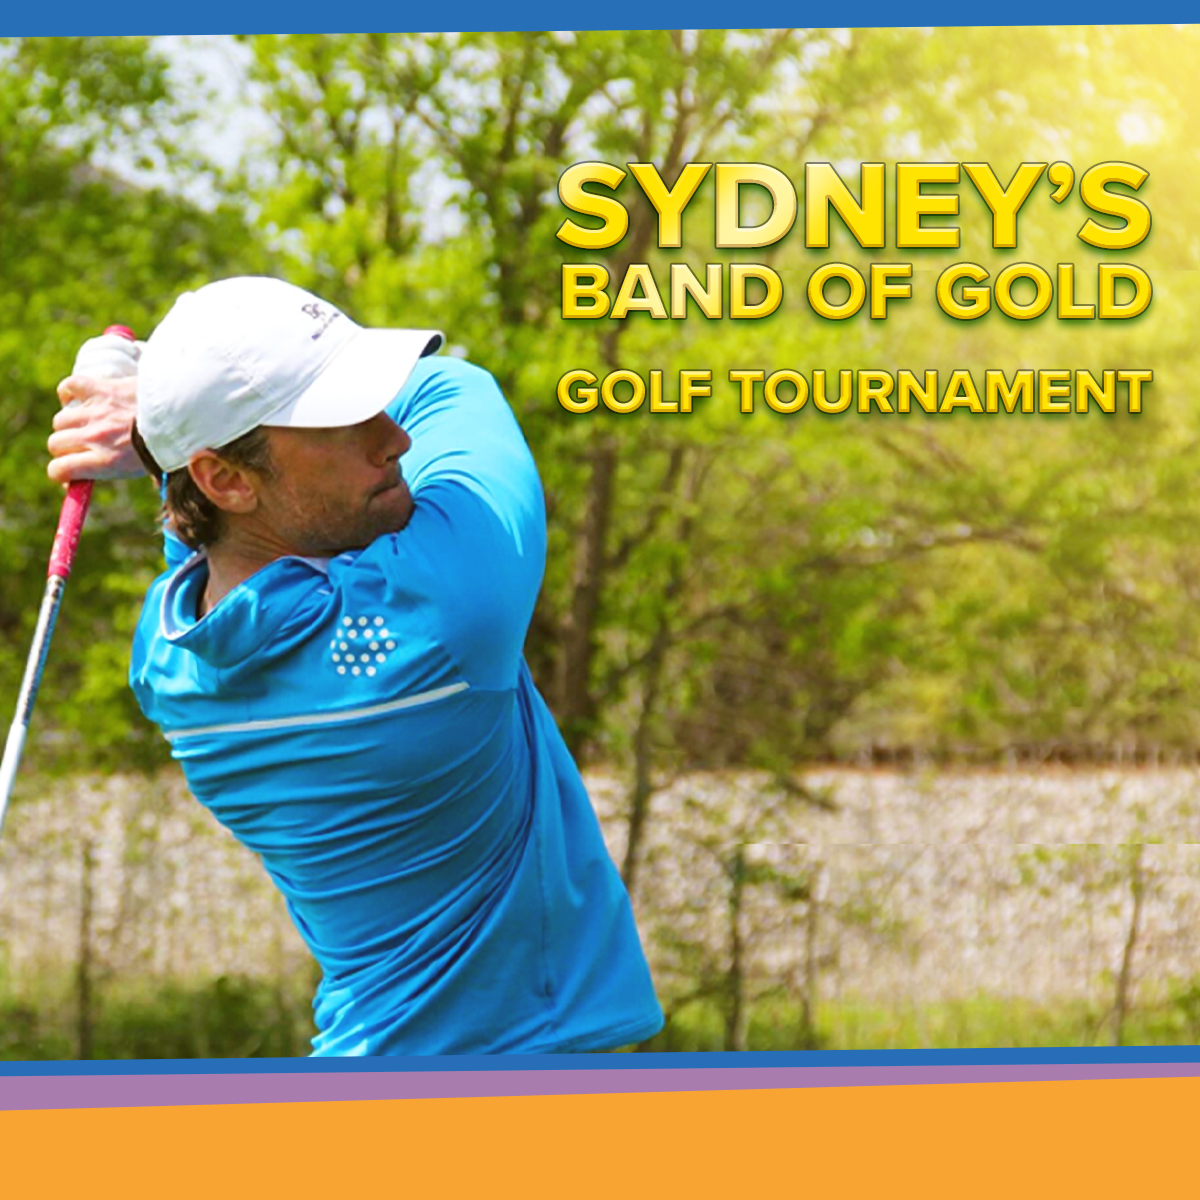 Sydney's Band of Gold Golf Tournament